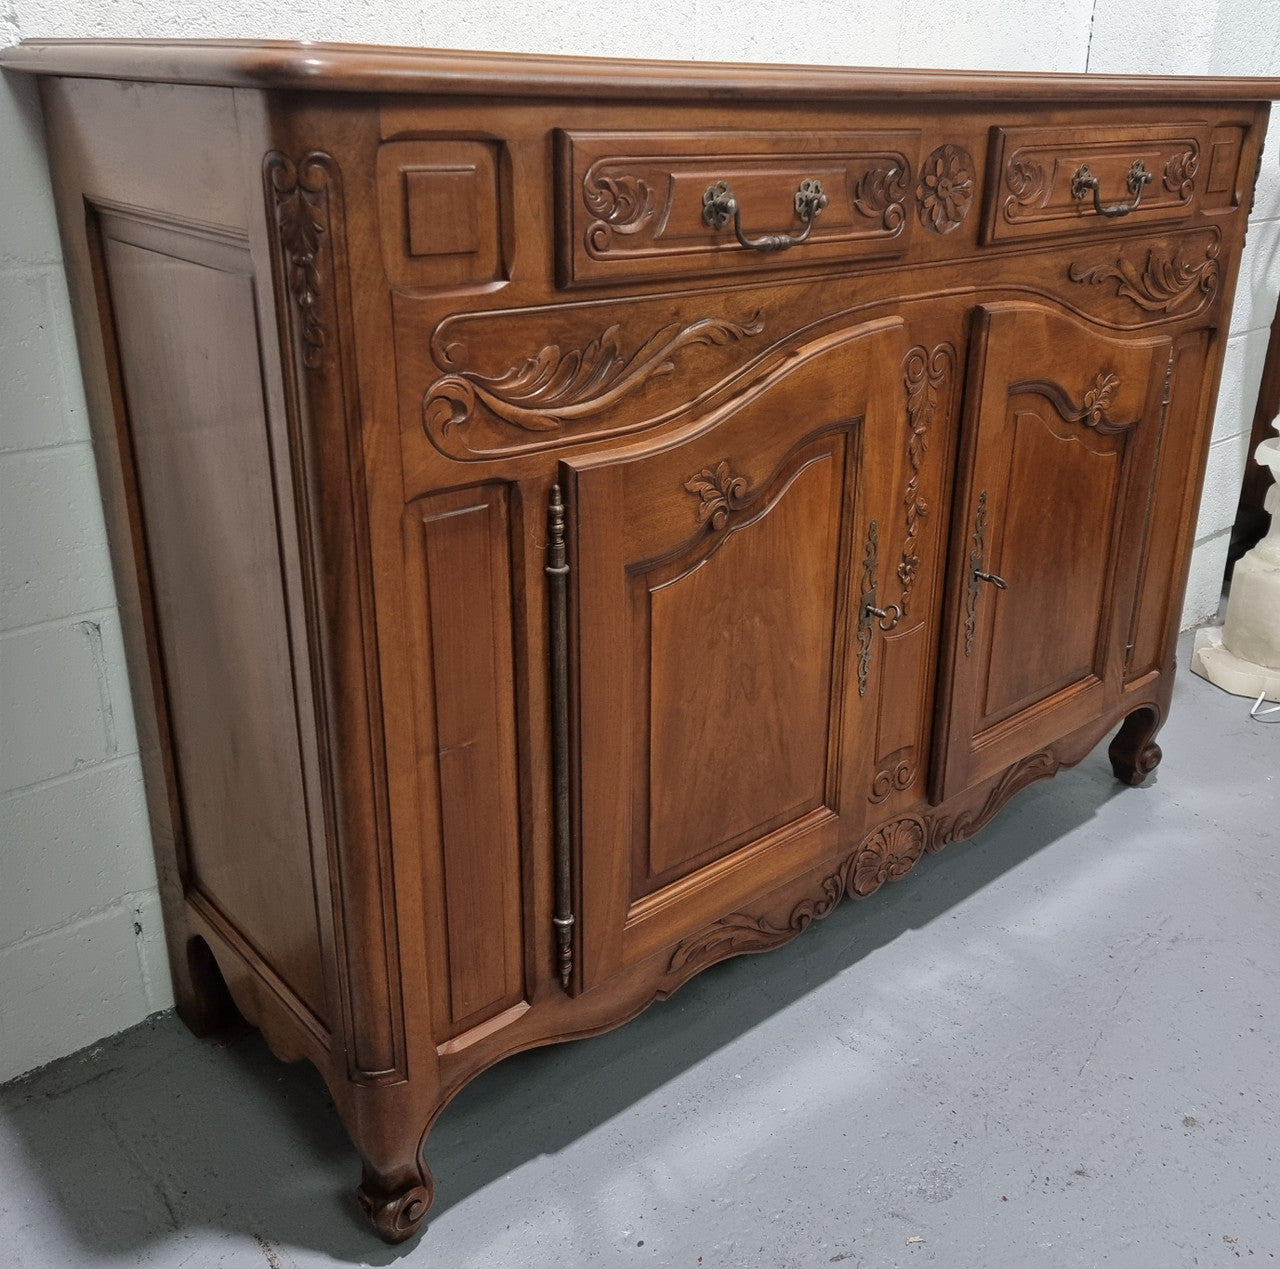 French Walnut two door buffet with parquetry top. It has two drawers and an adjustable shelf. In good original detailed condition and it has been sourced from France.